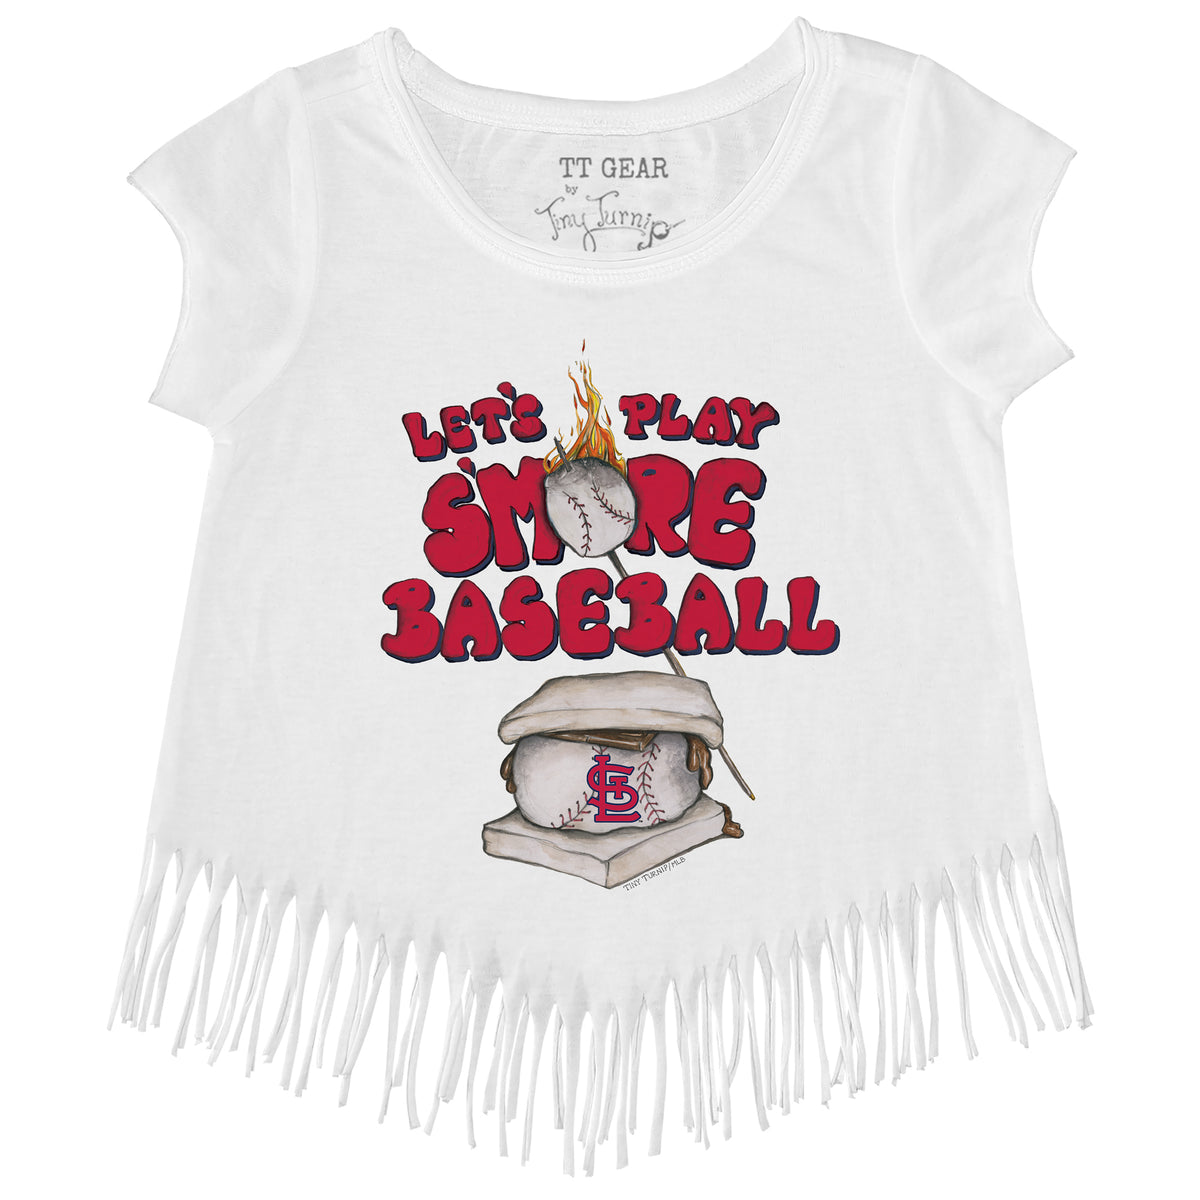 St. Louis Cardinals Tiny Turnip Youth State Outline 3/4-Sleeve Raglan  T-Shirt - White/Red